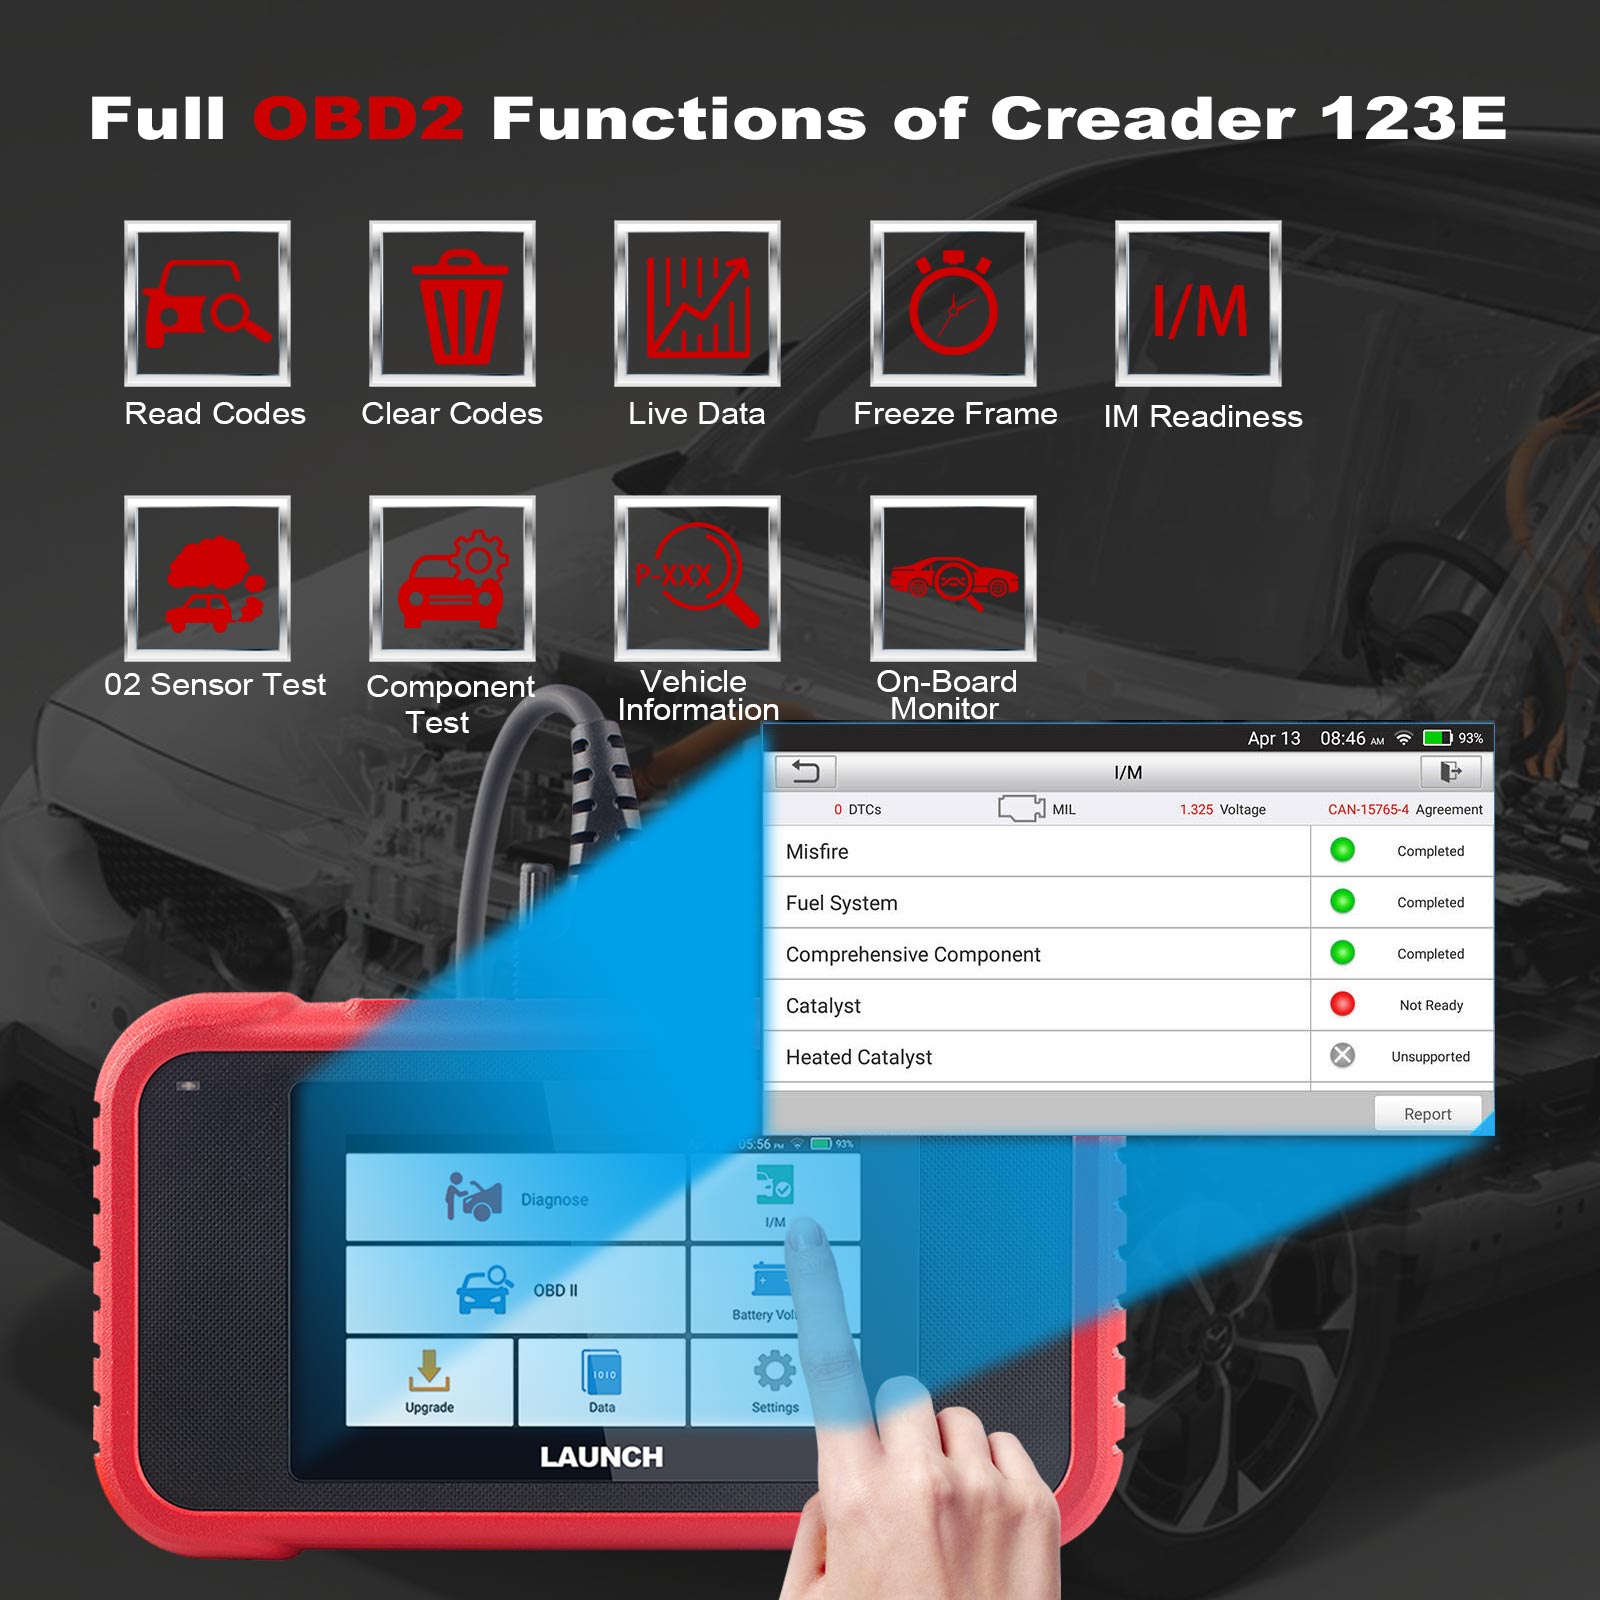 LAUNCH CRP123E Auto OBD2 Scanner Code Reader Engine AT ABS SRS Diagnostic  Tool